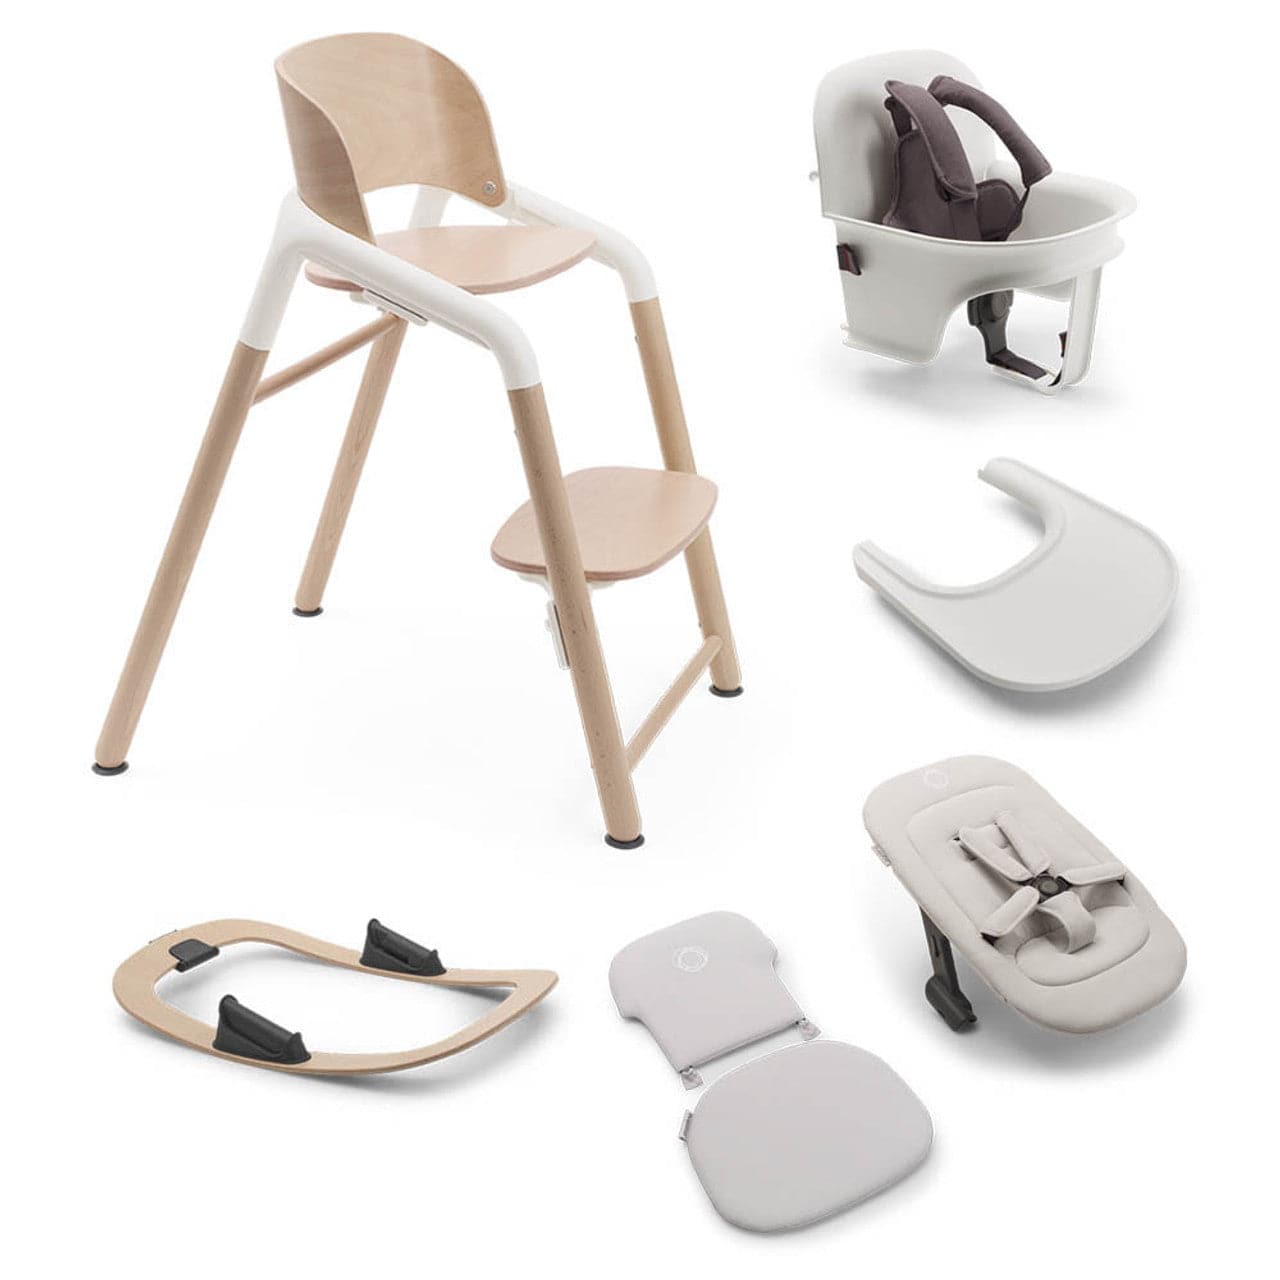 Bugaboo Giraffe Highchair Ultimate Bundle - Neutral Wood/White - For Your Little One